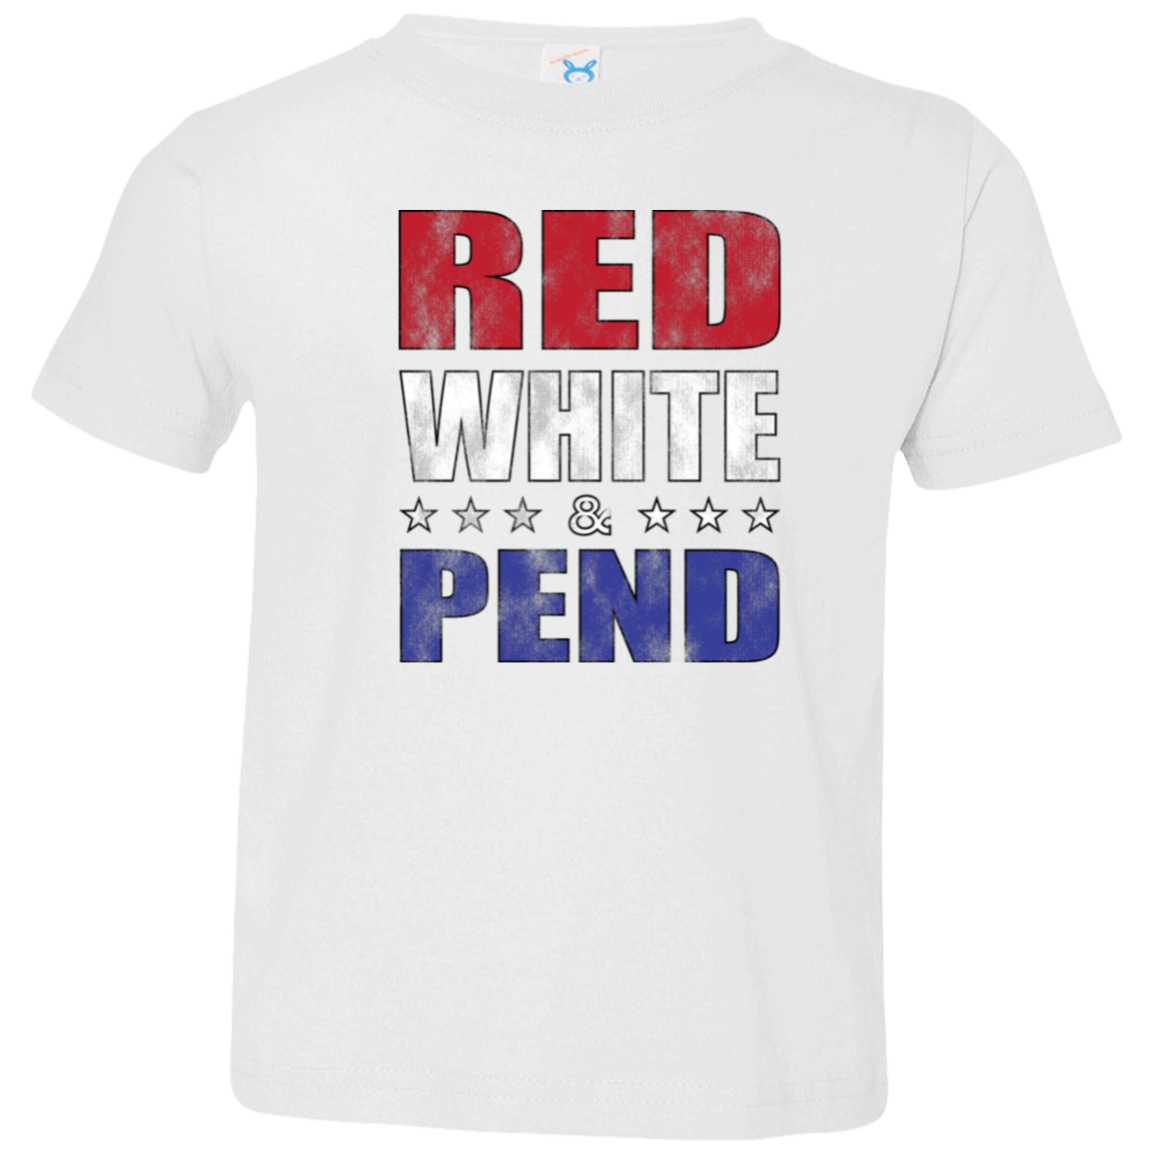 Red White & Pend Toddler Shirt